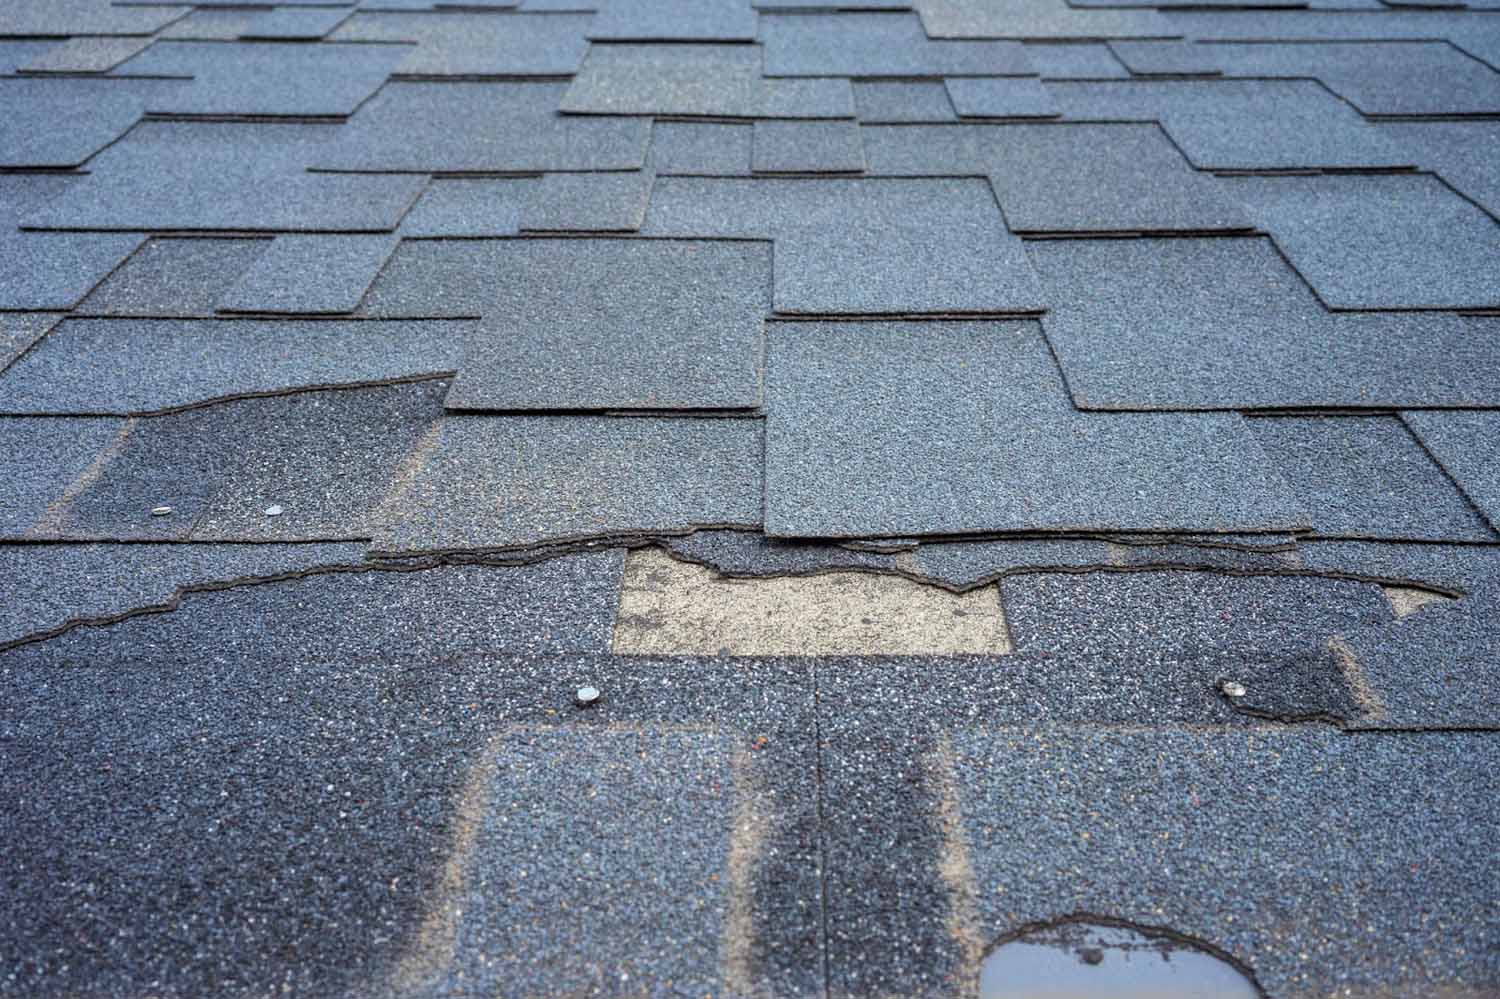 Close up image of a shingle roof that has missing and torn shingles, cause by wind damage.